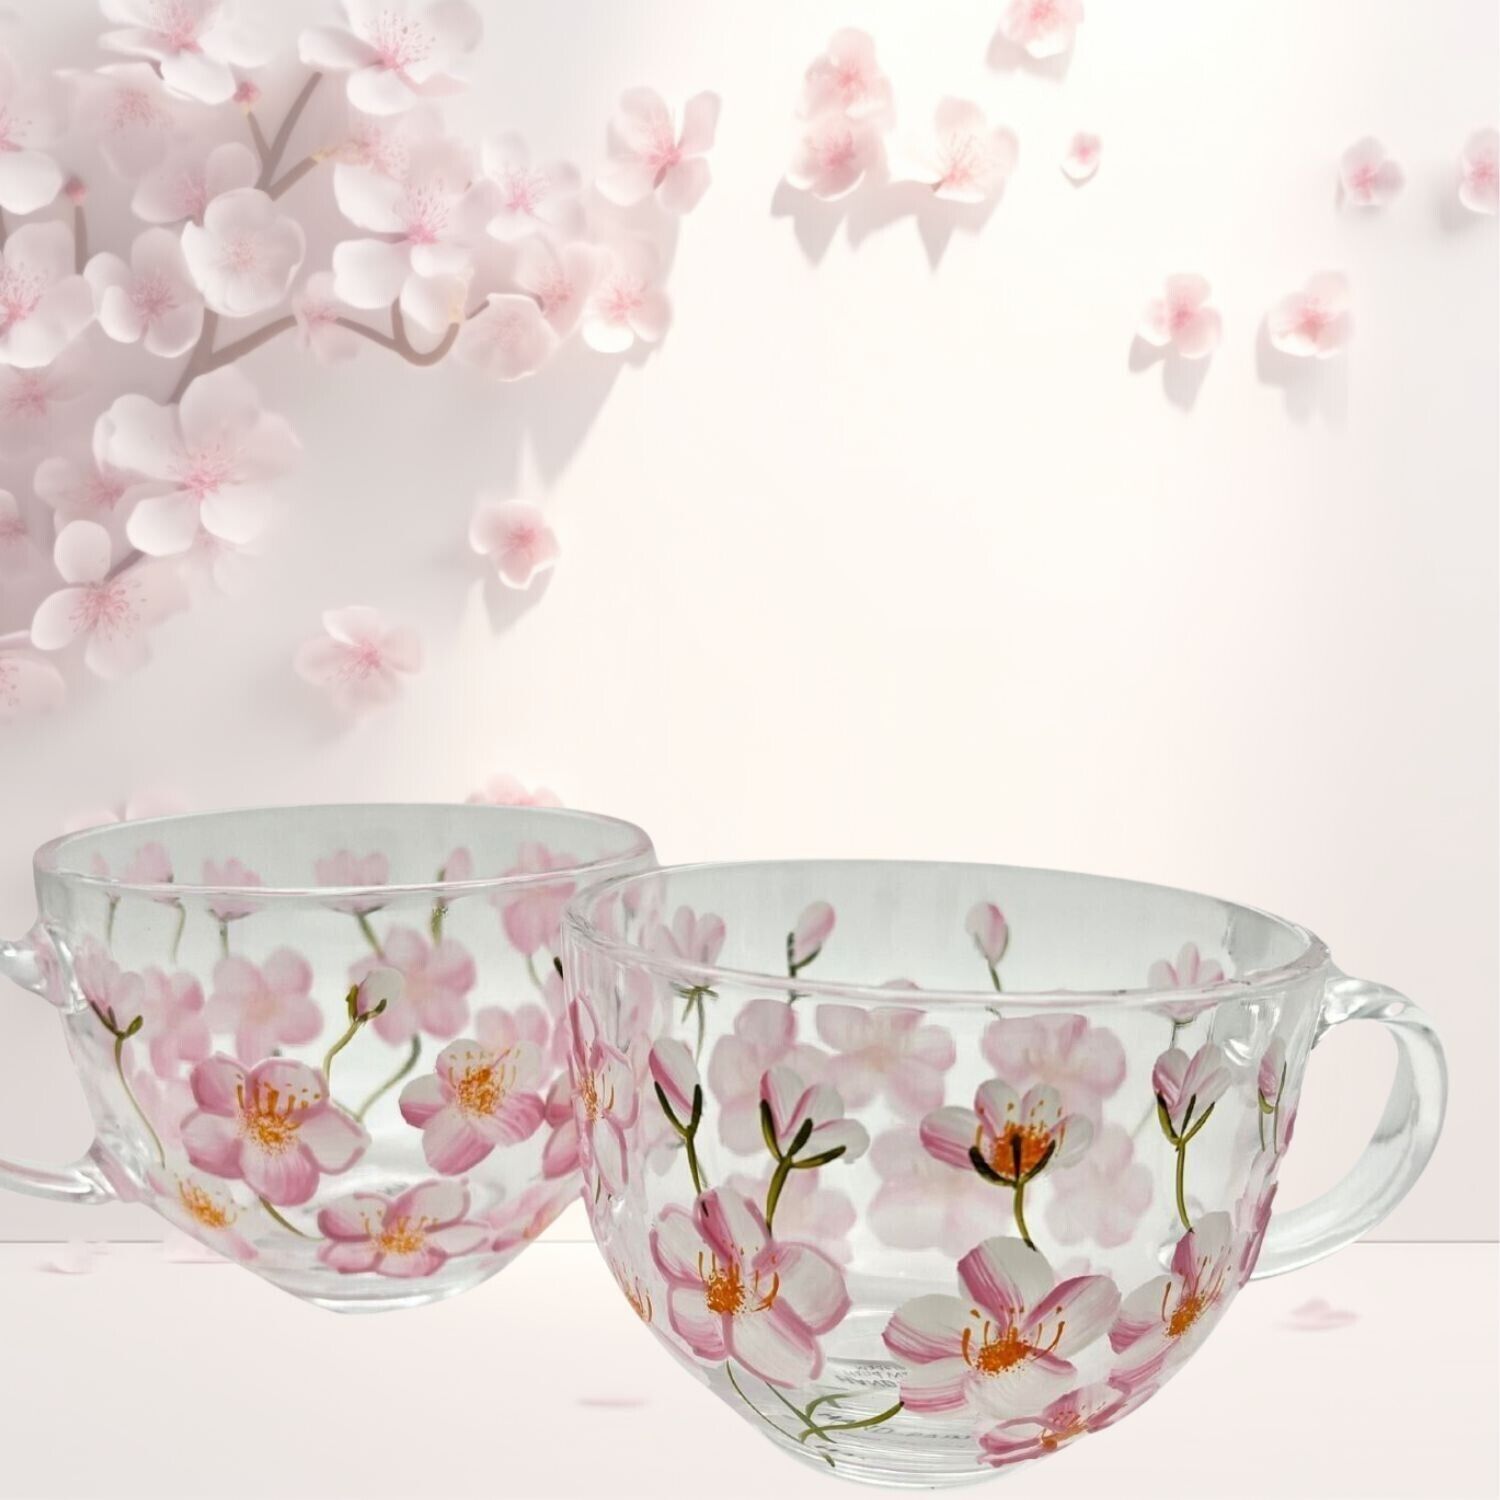 Hand Painted Cherry Blossom Teacup Set  Tea Easter Spring GRD